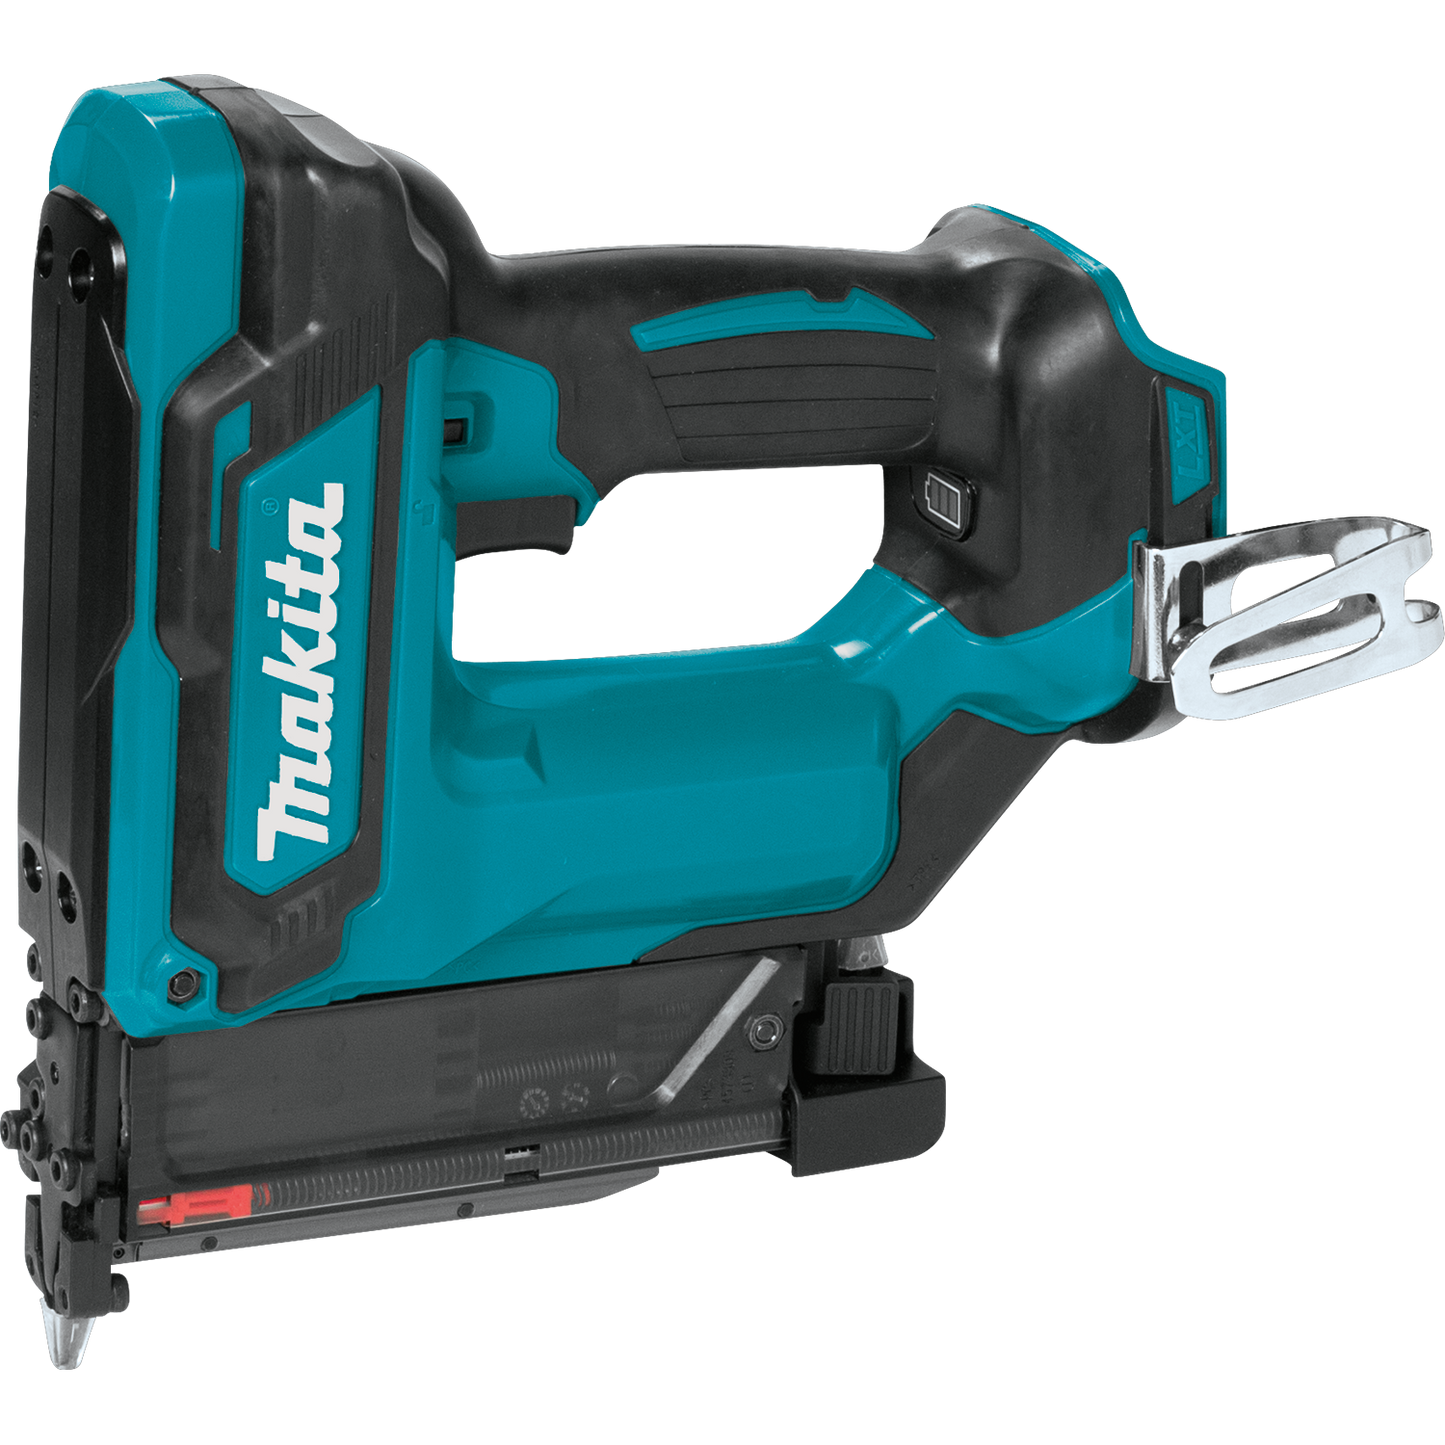 Makita 18 Volt LXT Lithium Ion Cordless 1 3/8 Inch 23 Gauge Pin Nailer Factory Serviced (Tool Only)